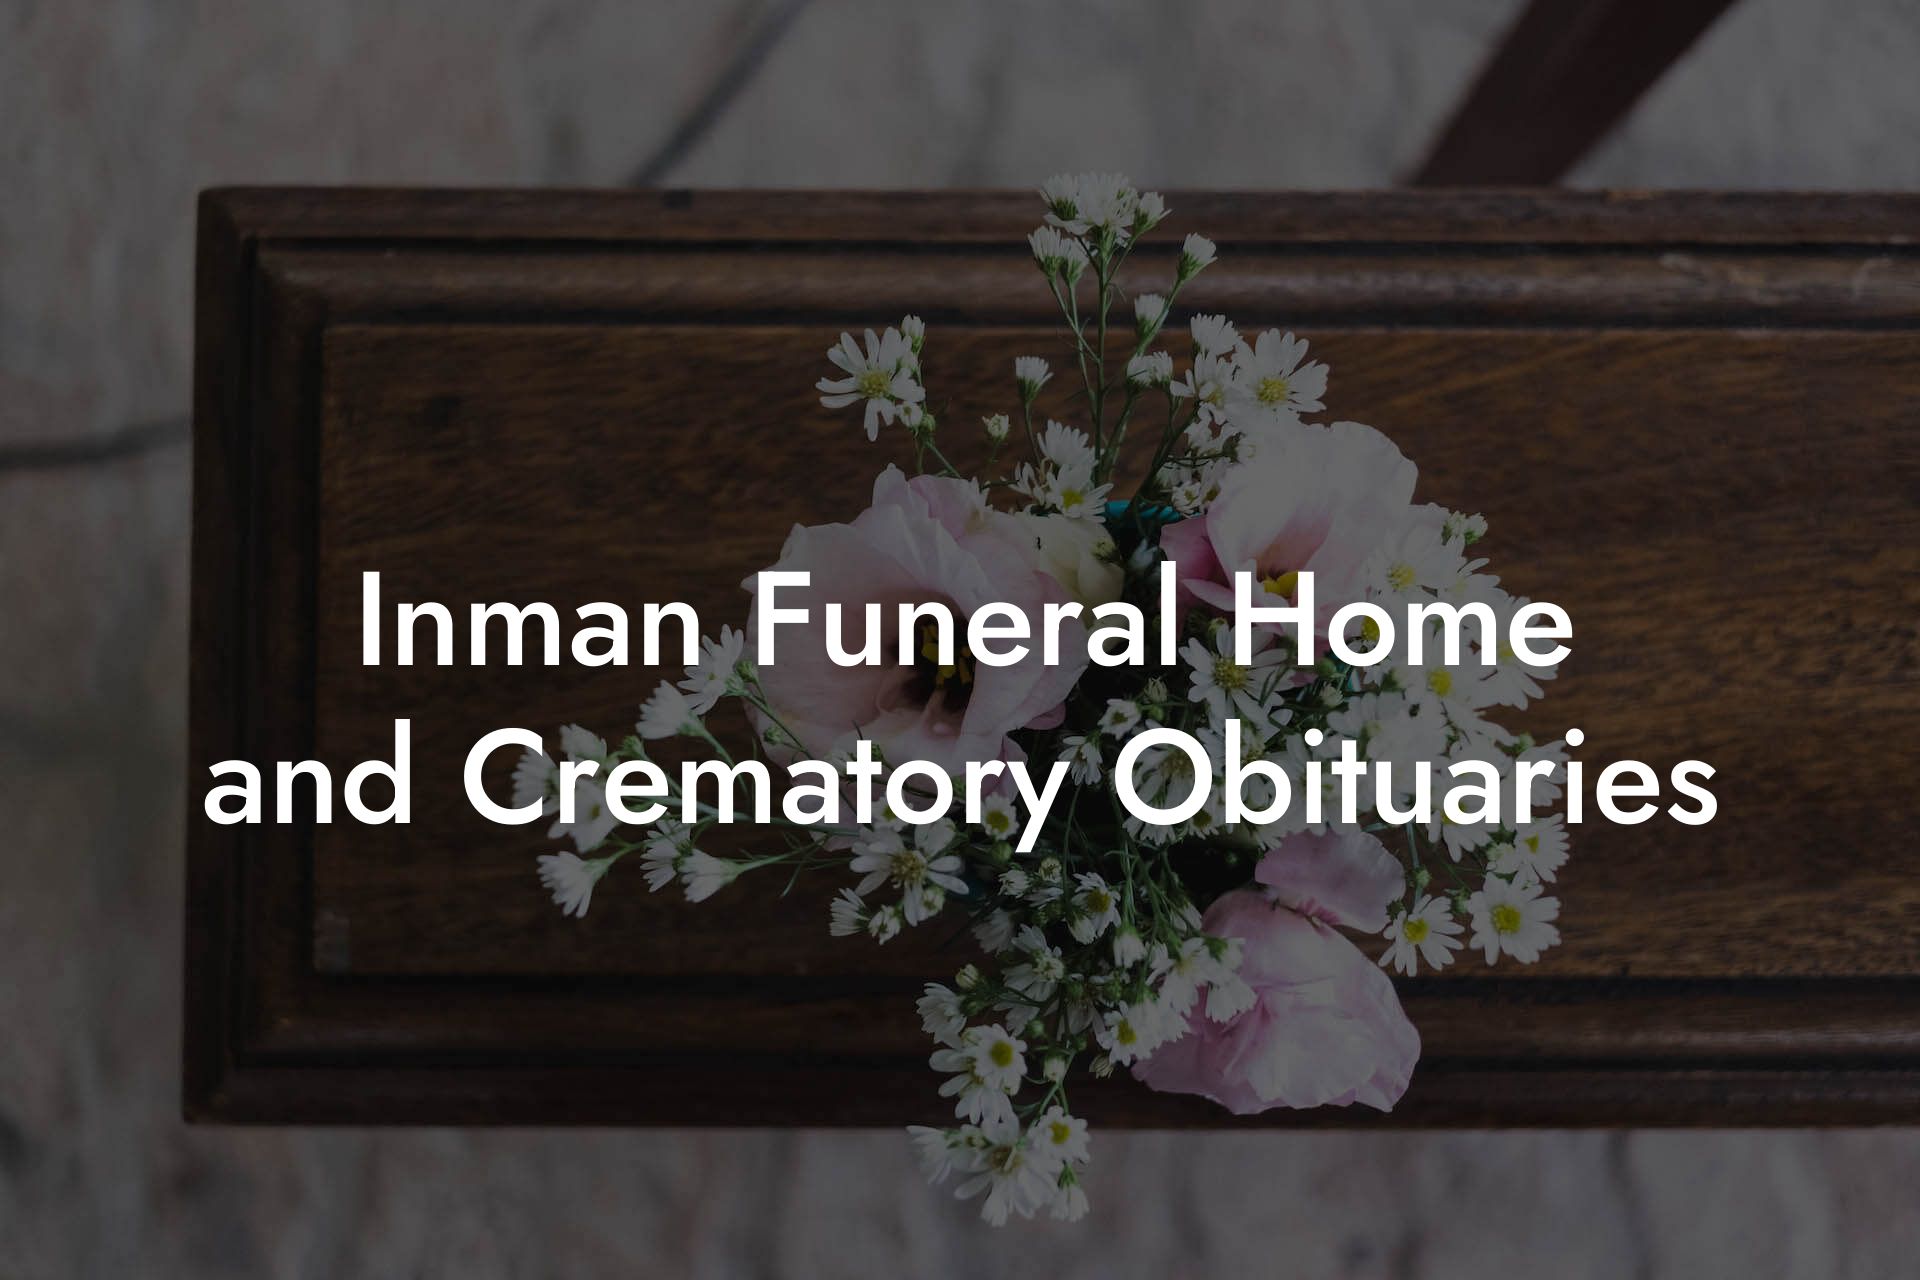 Inman Funeral Home and Crematory Obituaries